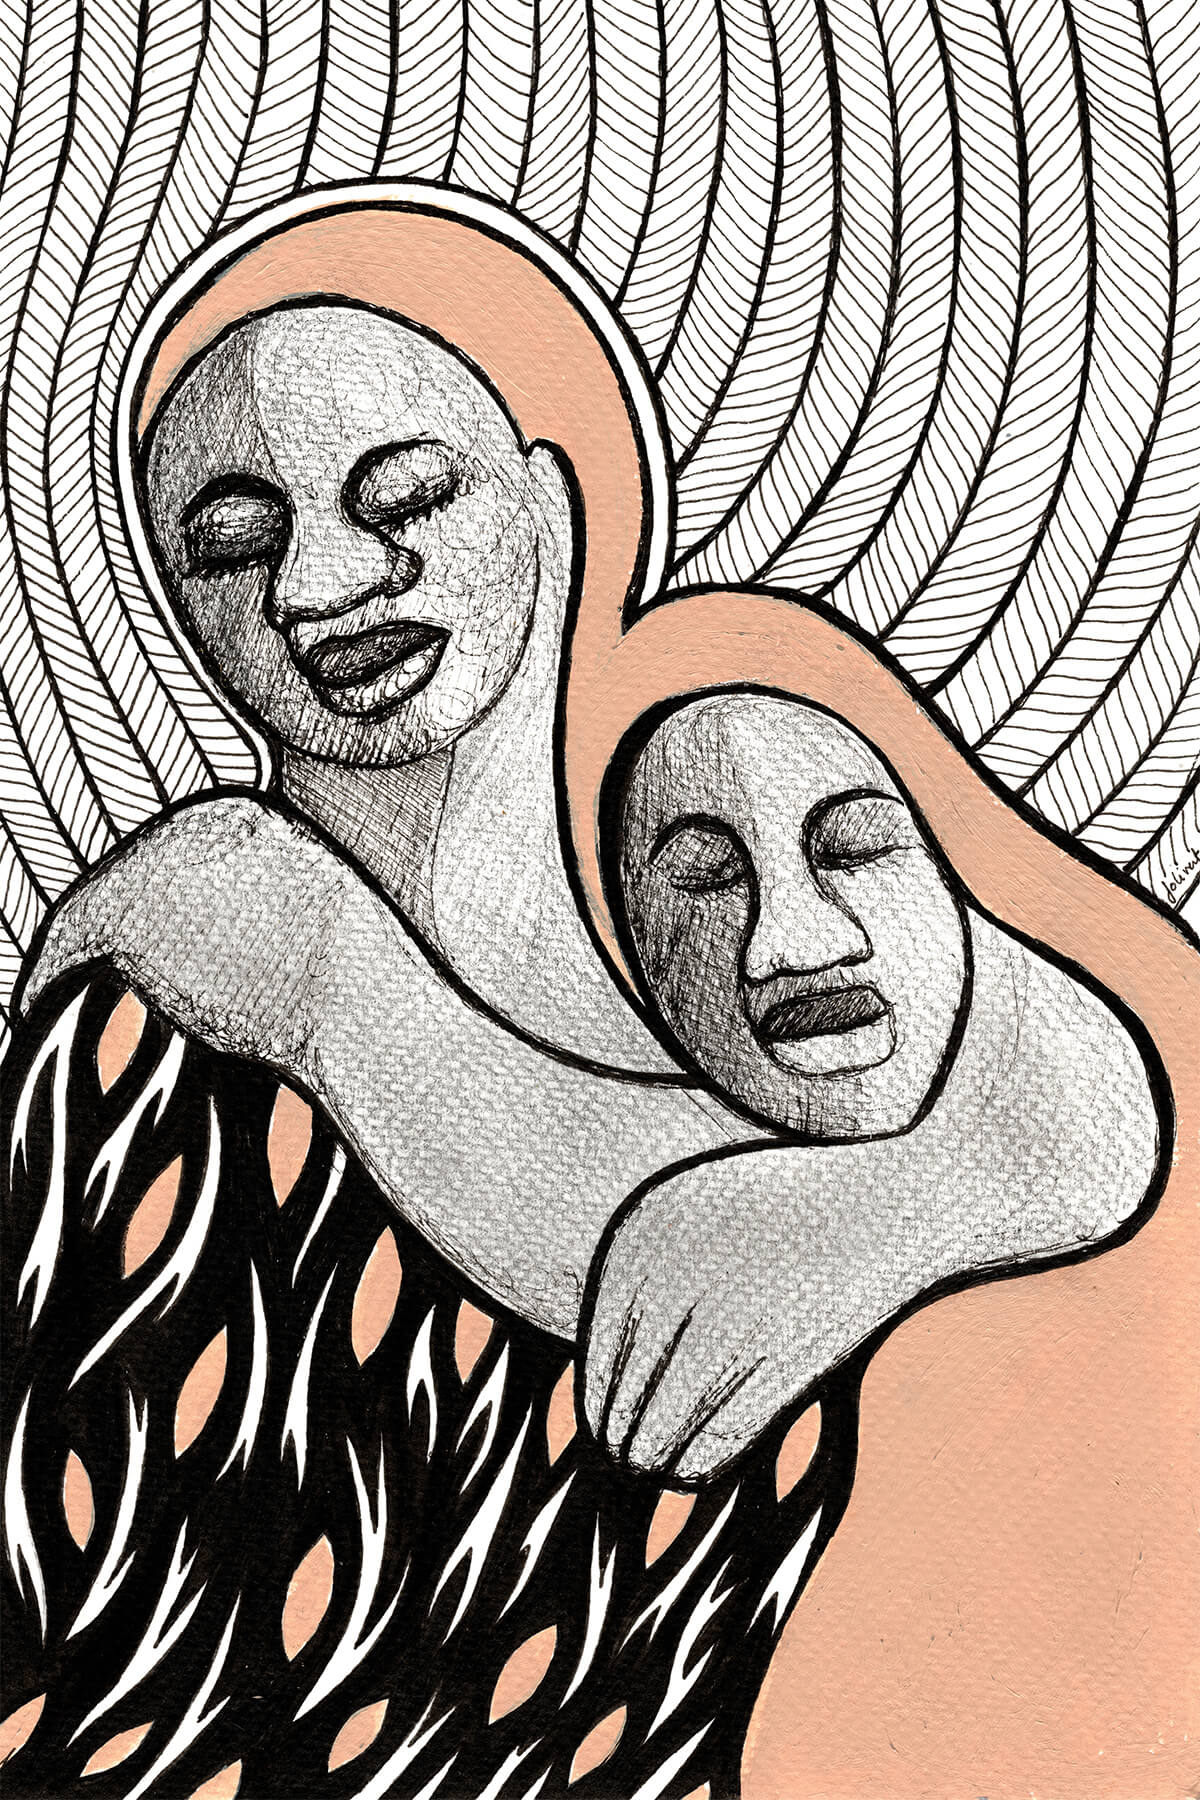 A stylized ink drawing of two female faces, one taller and older and the other smallers, embracing with eyes closed and arms wrapped around one another. The taller woman is in a pattenred dress with pink black and white shapes. The two figures' hair is painted in flat pink and blends together into a single shapre flowing around them. The background above is curved, parallel lines with patterned hatching.